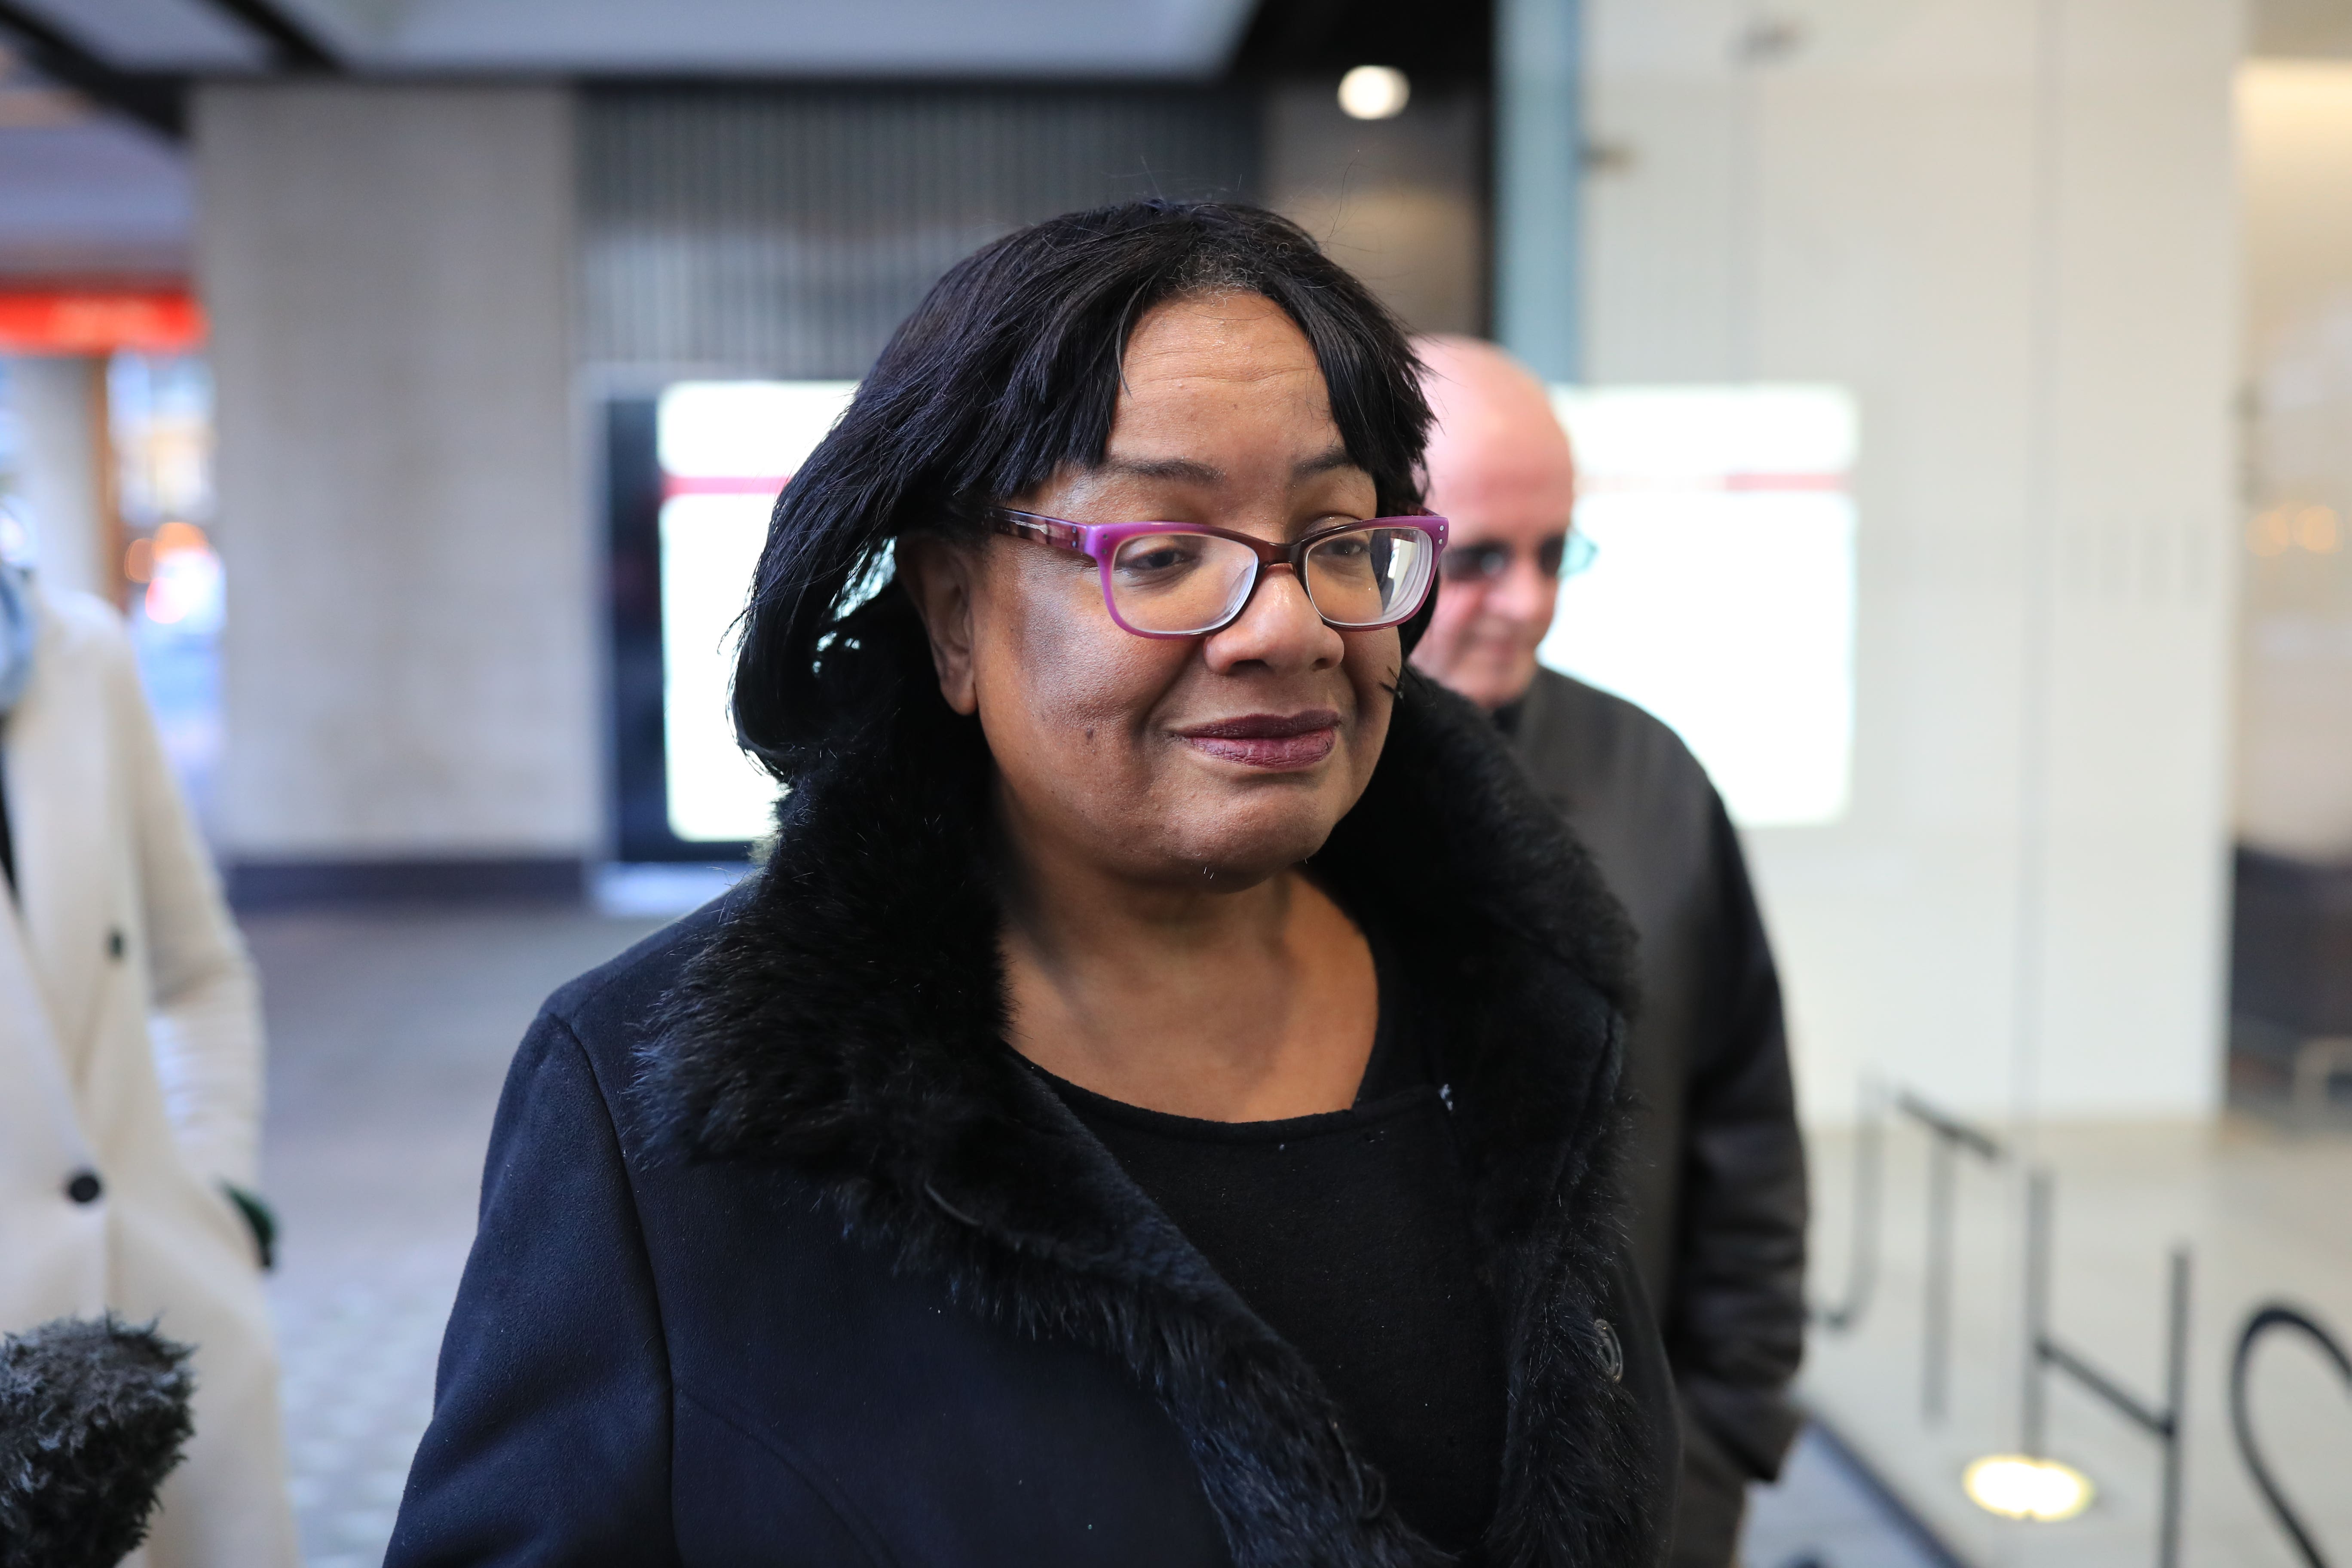 Diane Abbott is receiving support to stand as a Labour candidate again